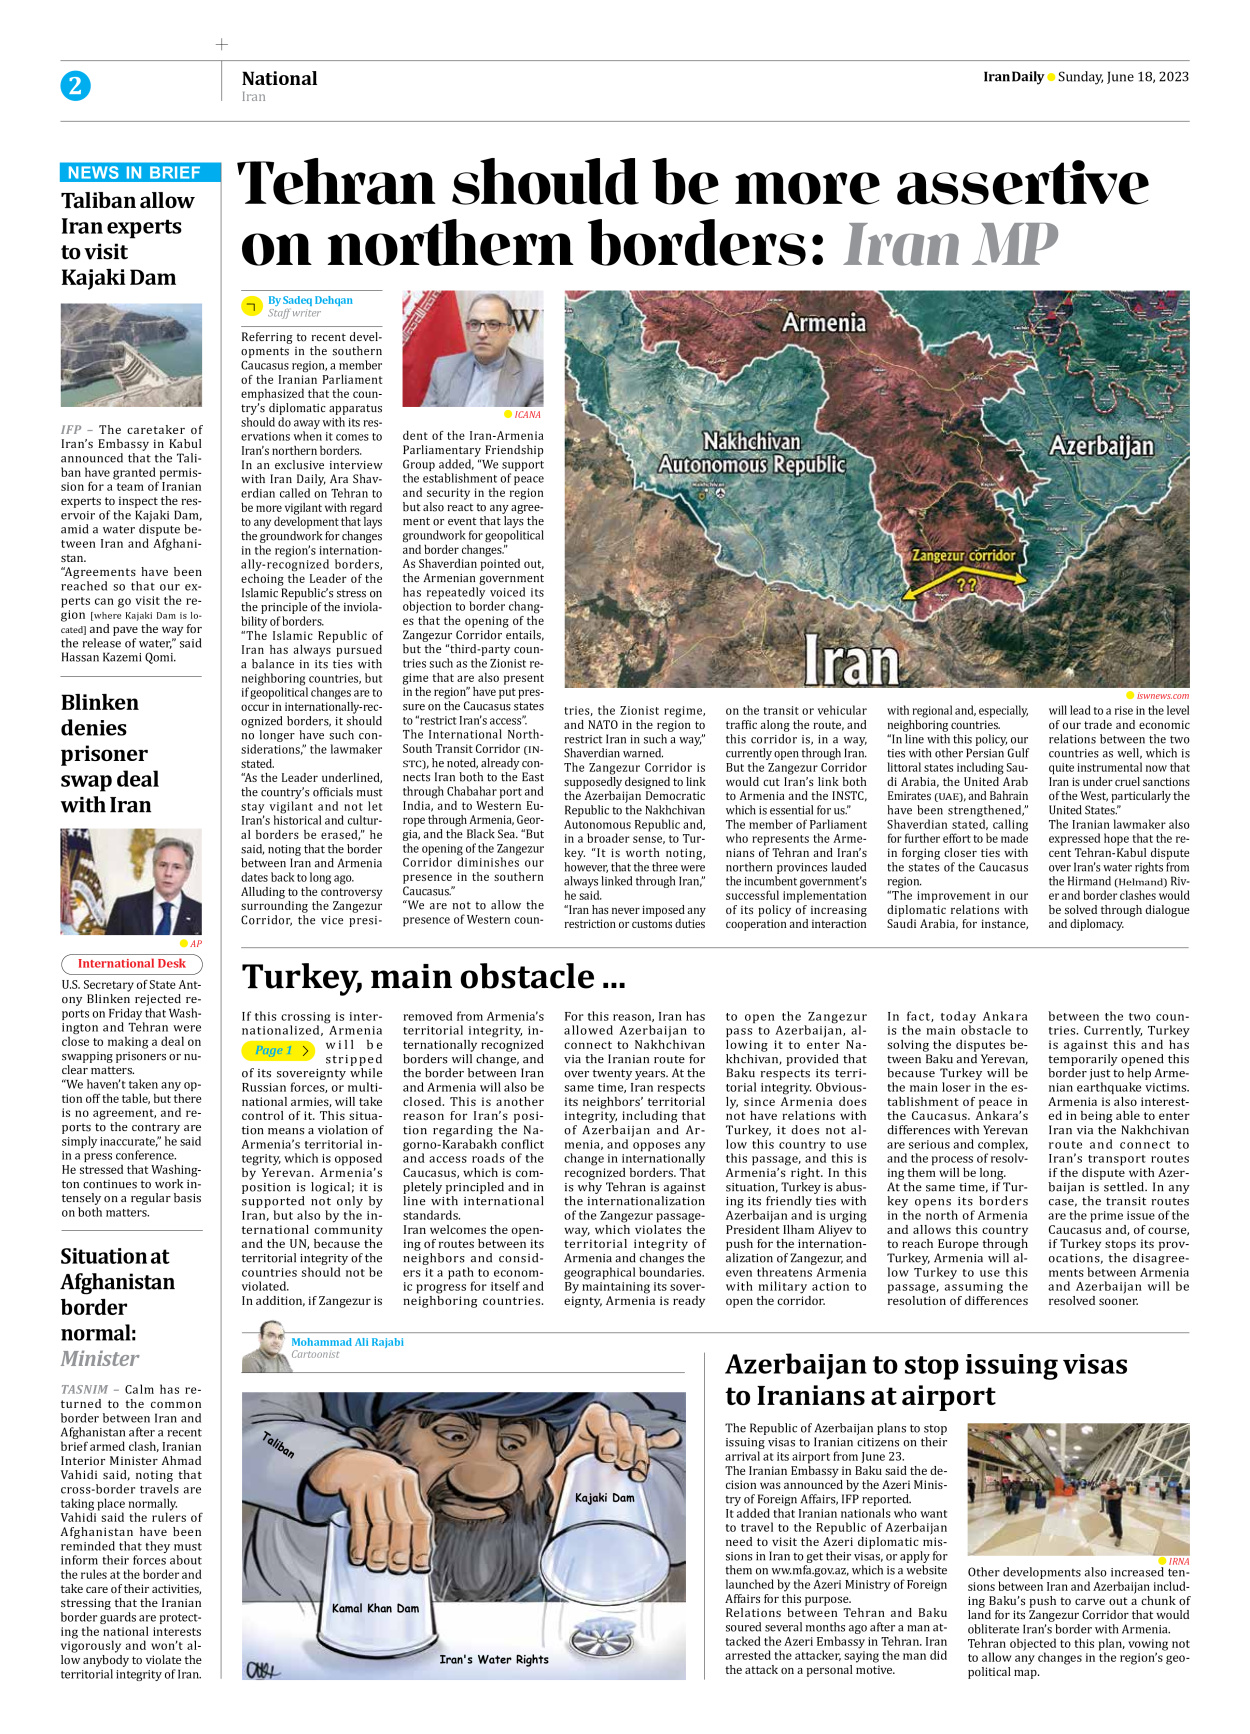 Iran Daily - Number Seven Thousand Three Hundred and Seventeen - 18 June 2023 - Page 2